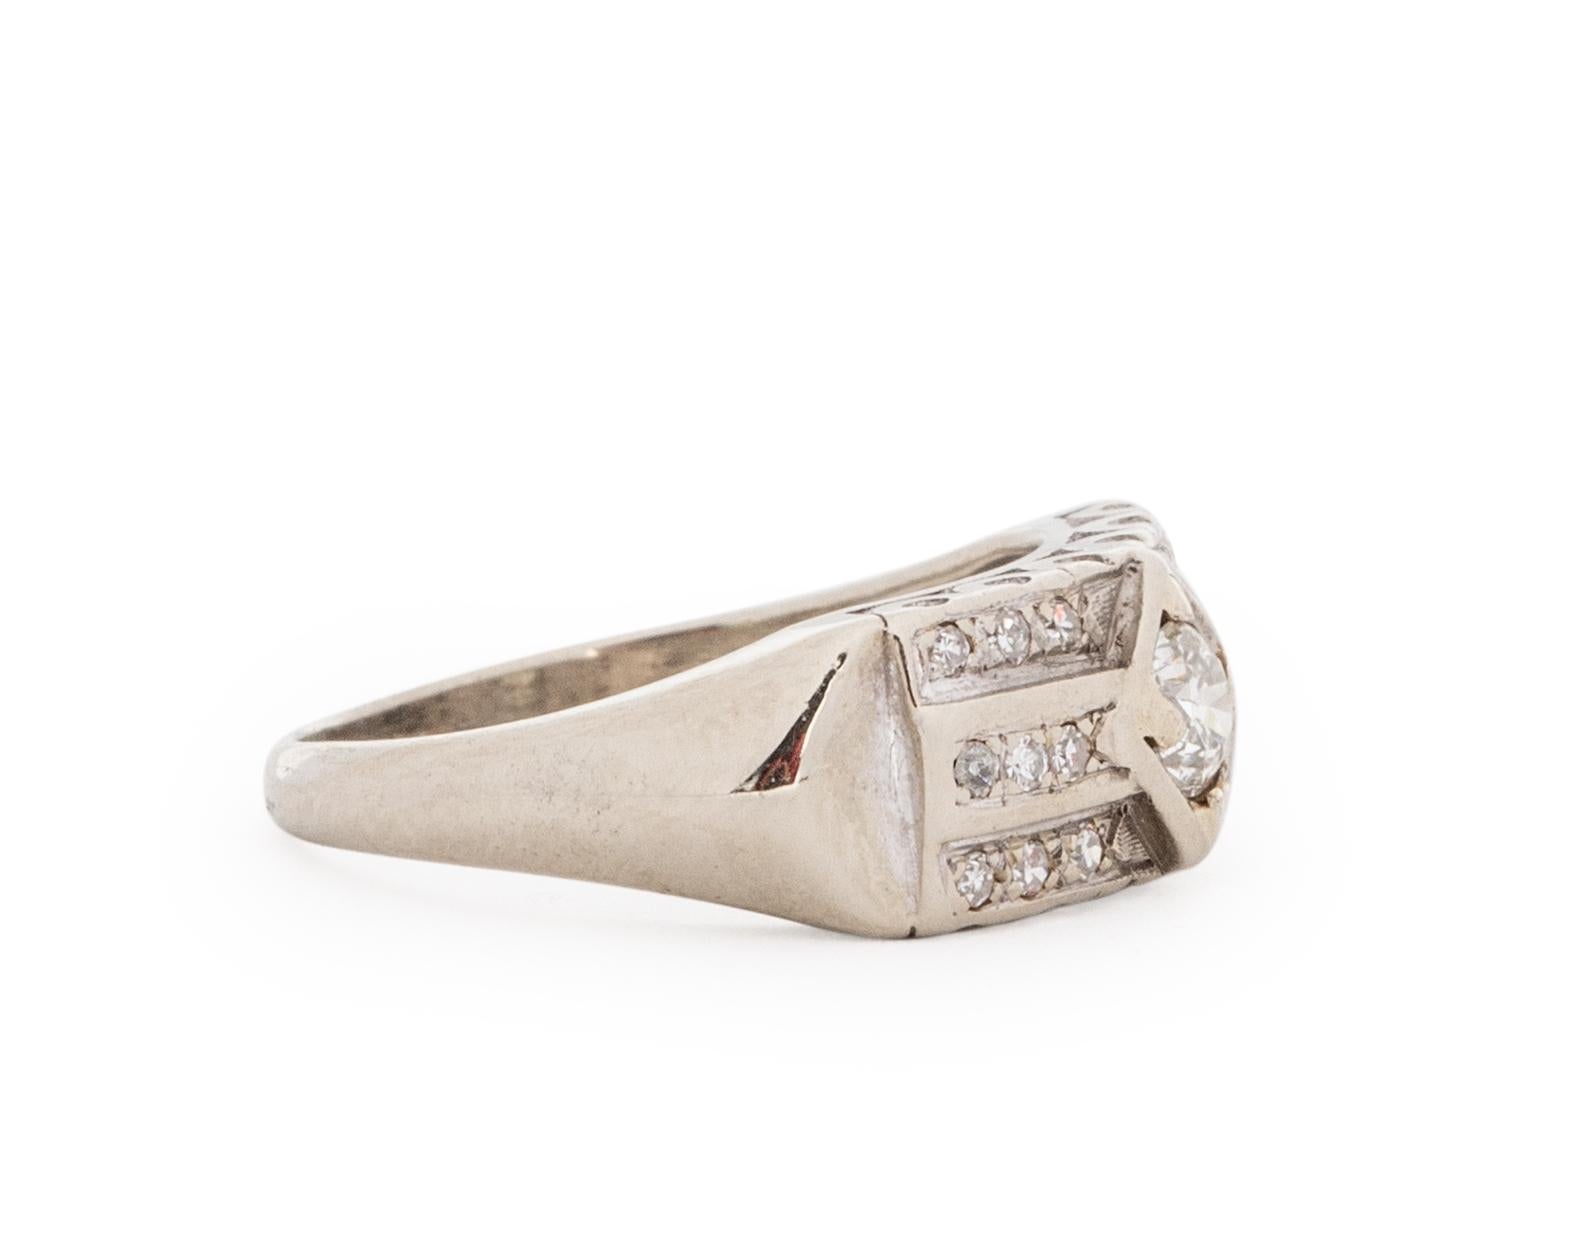 Item Details: 
Ring Size: 6
Metal Type: 14 Karat white gold [Hallmarked, and Tested]
Weight: 2.5 grams

Diamond Details:
Weight: .50 Carat Total Weight
Cut: Transitional Round
Color: G
Clarity: VS

Finger to Top of Stone Measurement: 4 mm
Condition: